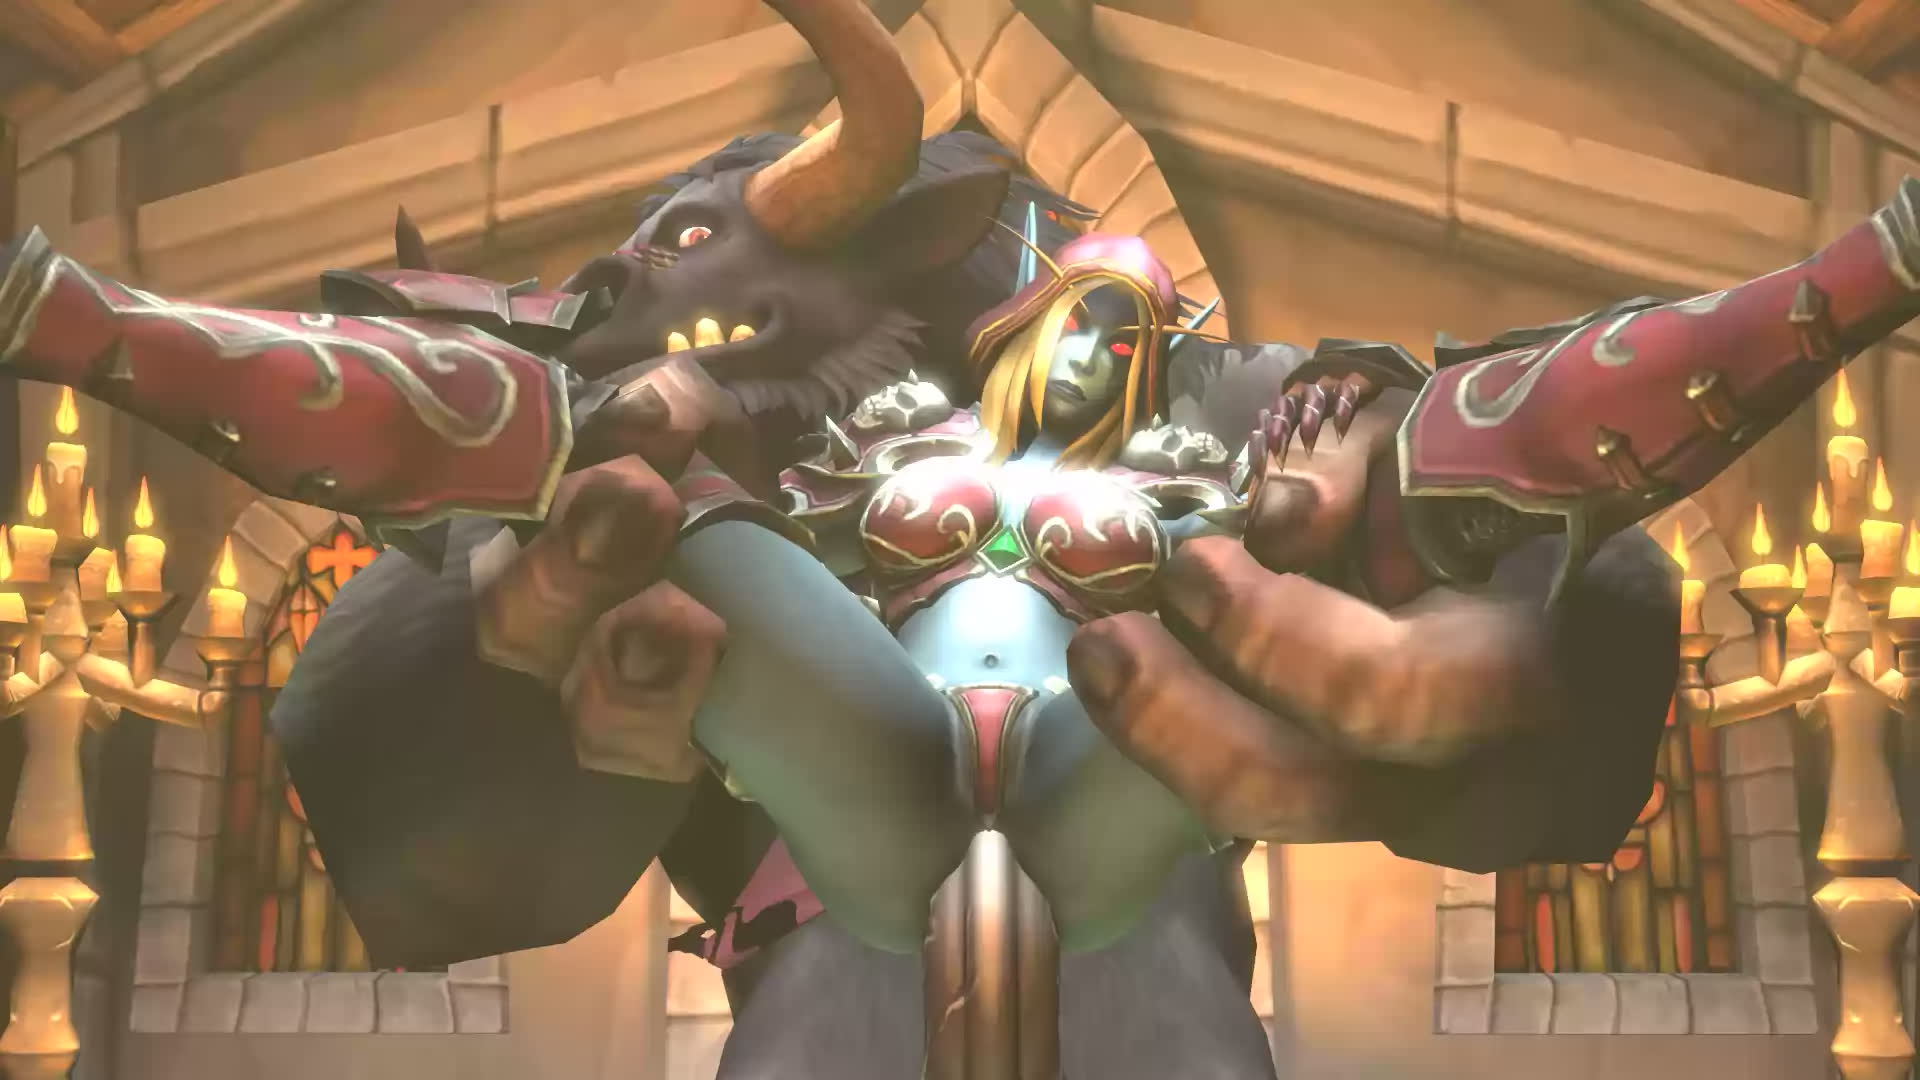 Sylvanas Windrunner Rides Huge Cock In Ass – World Of Warcraft NSFW animation thumbnail